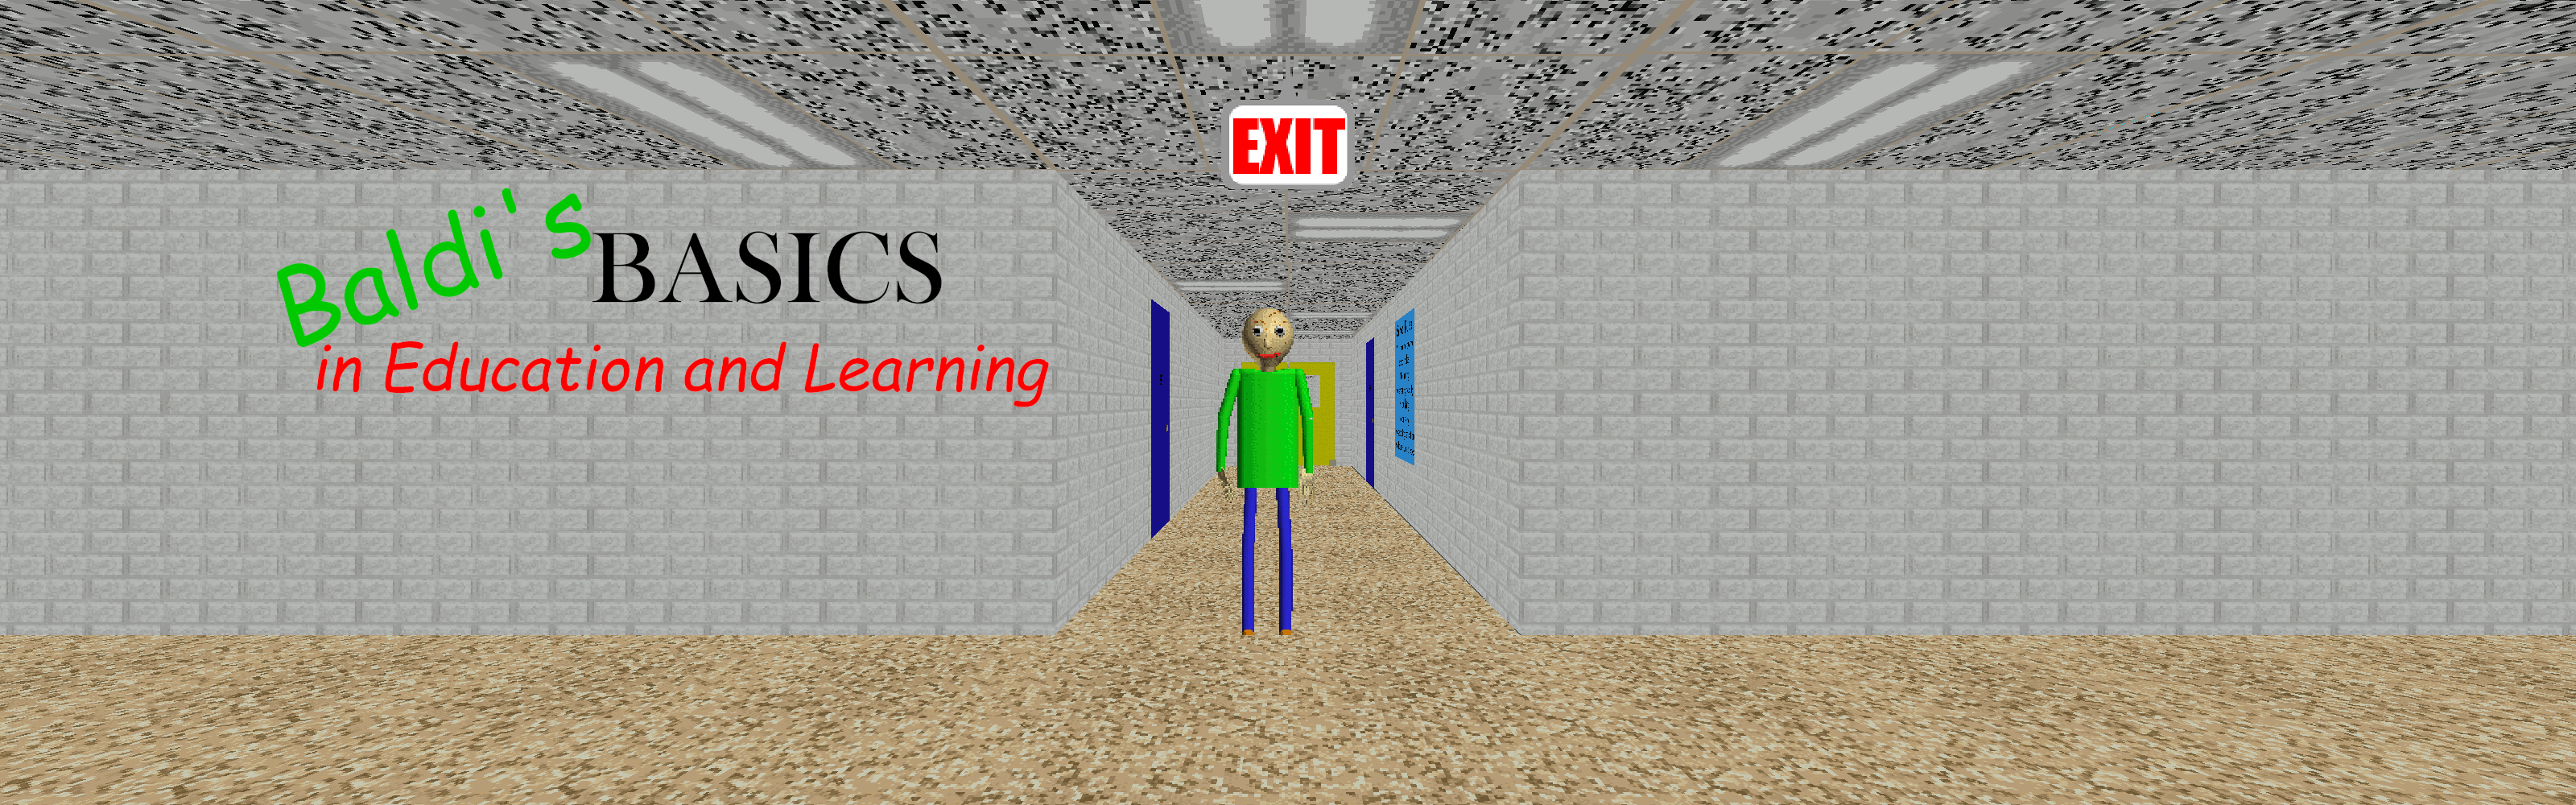 Baldi S Basics In Education And Learning By Basically Games